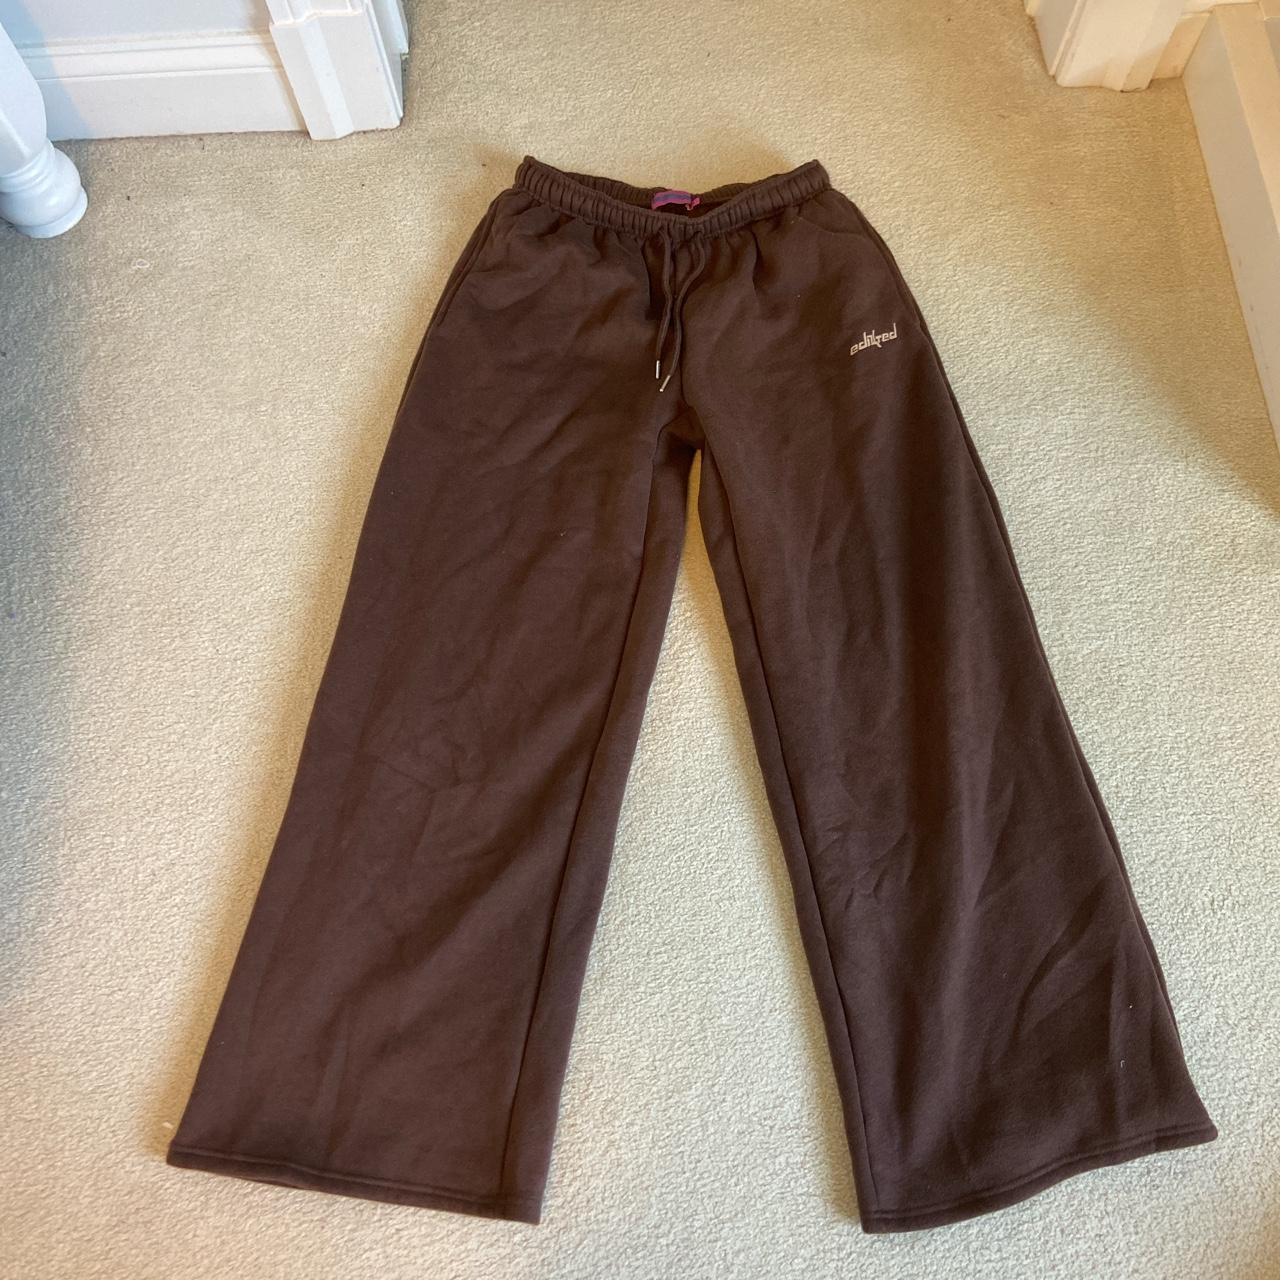 Edikted Women's Brown Joggers-tracksuits (2)